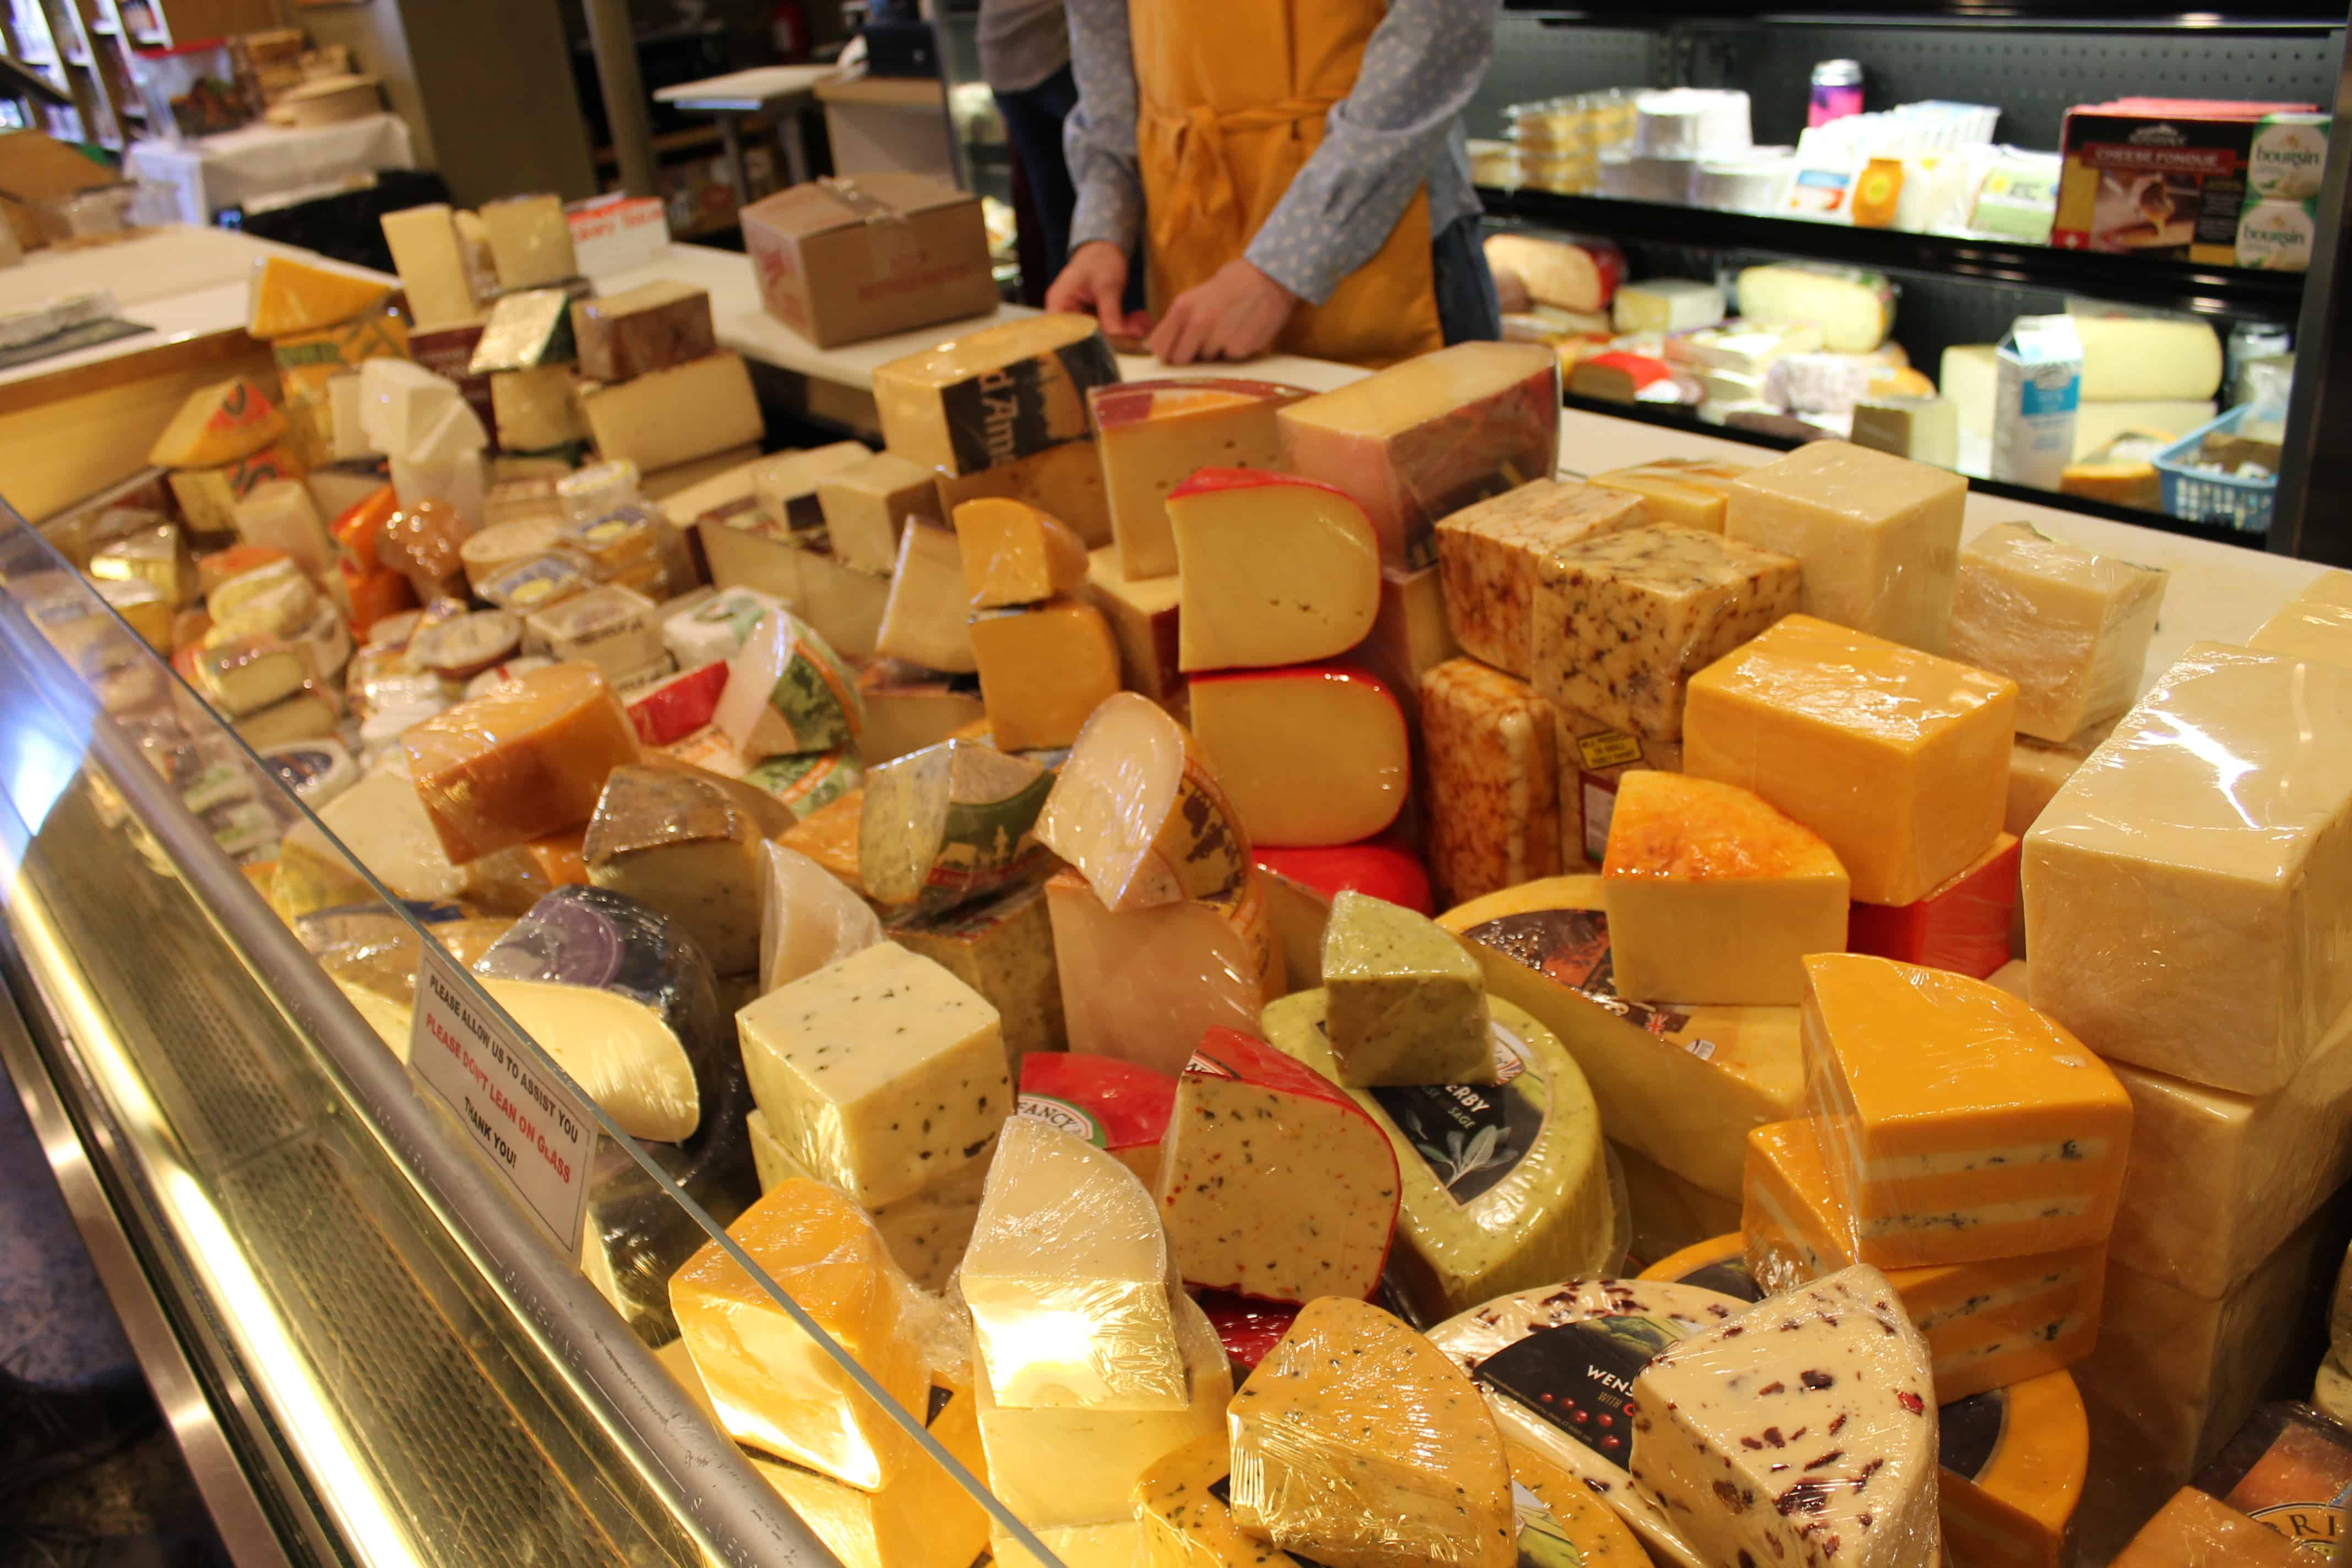 The Cheese Shop in Williamsburg has so much cheese